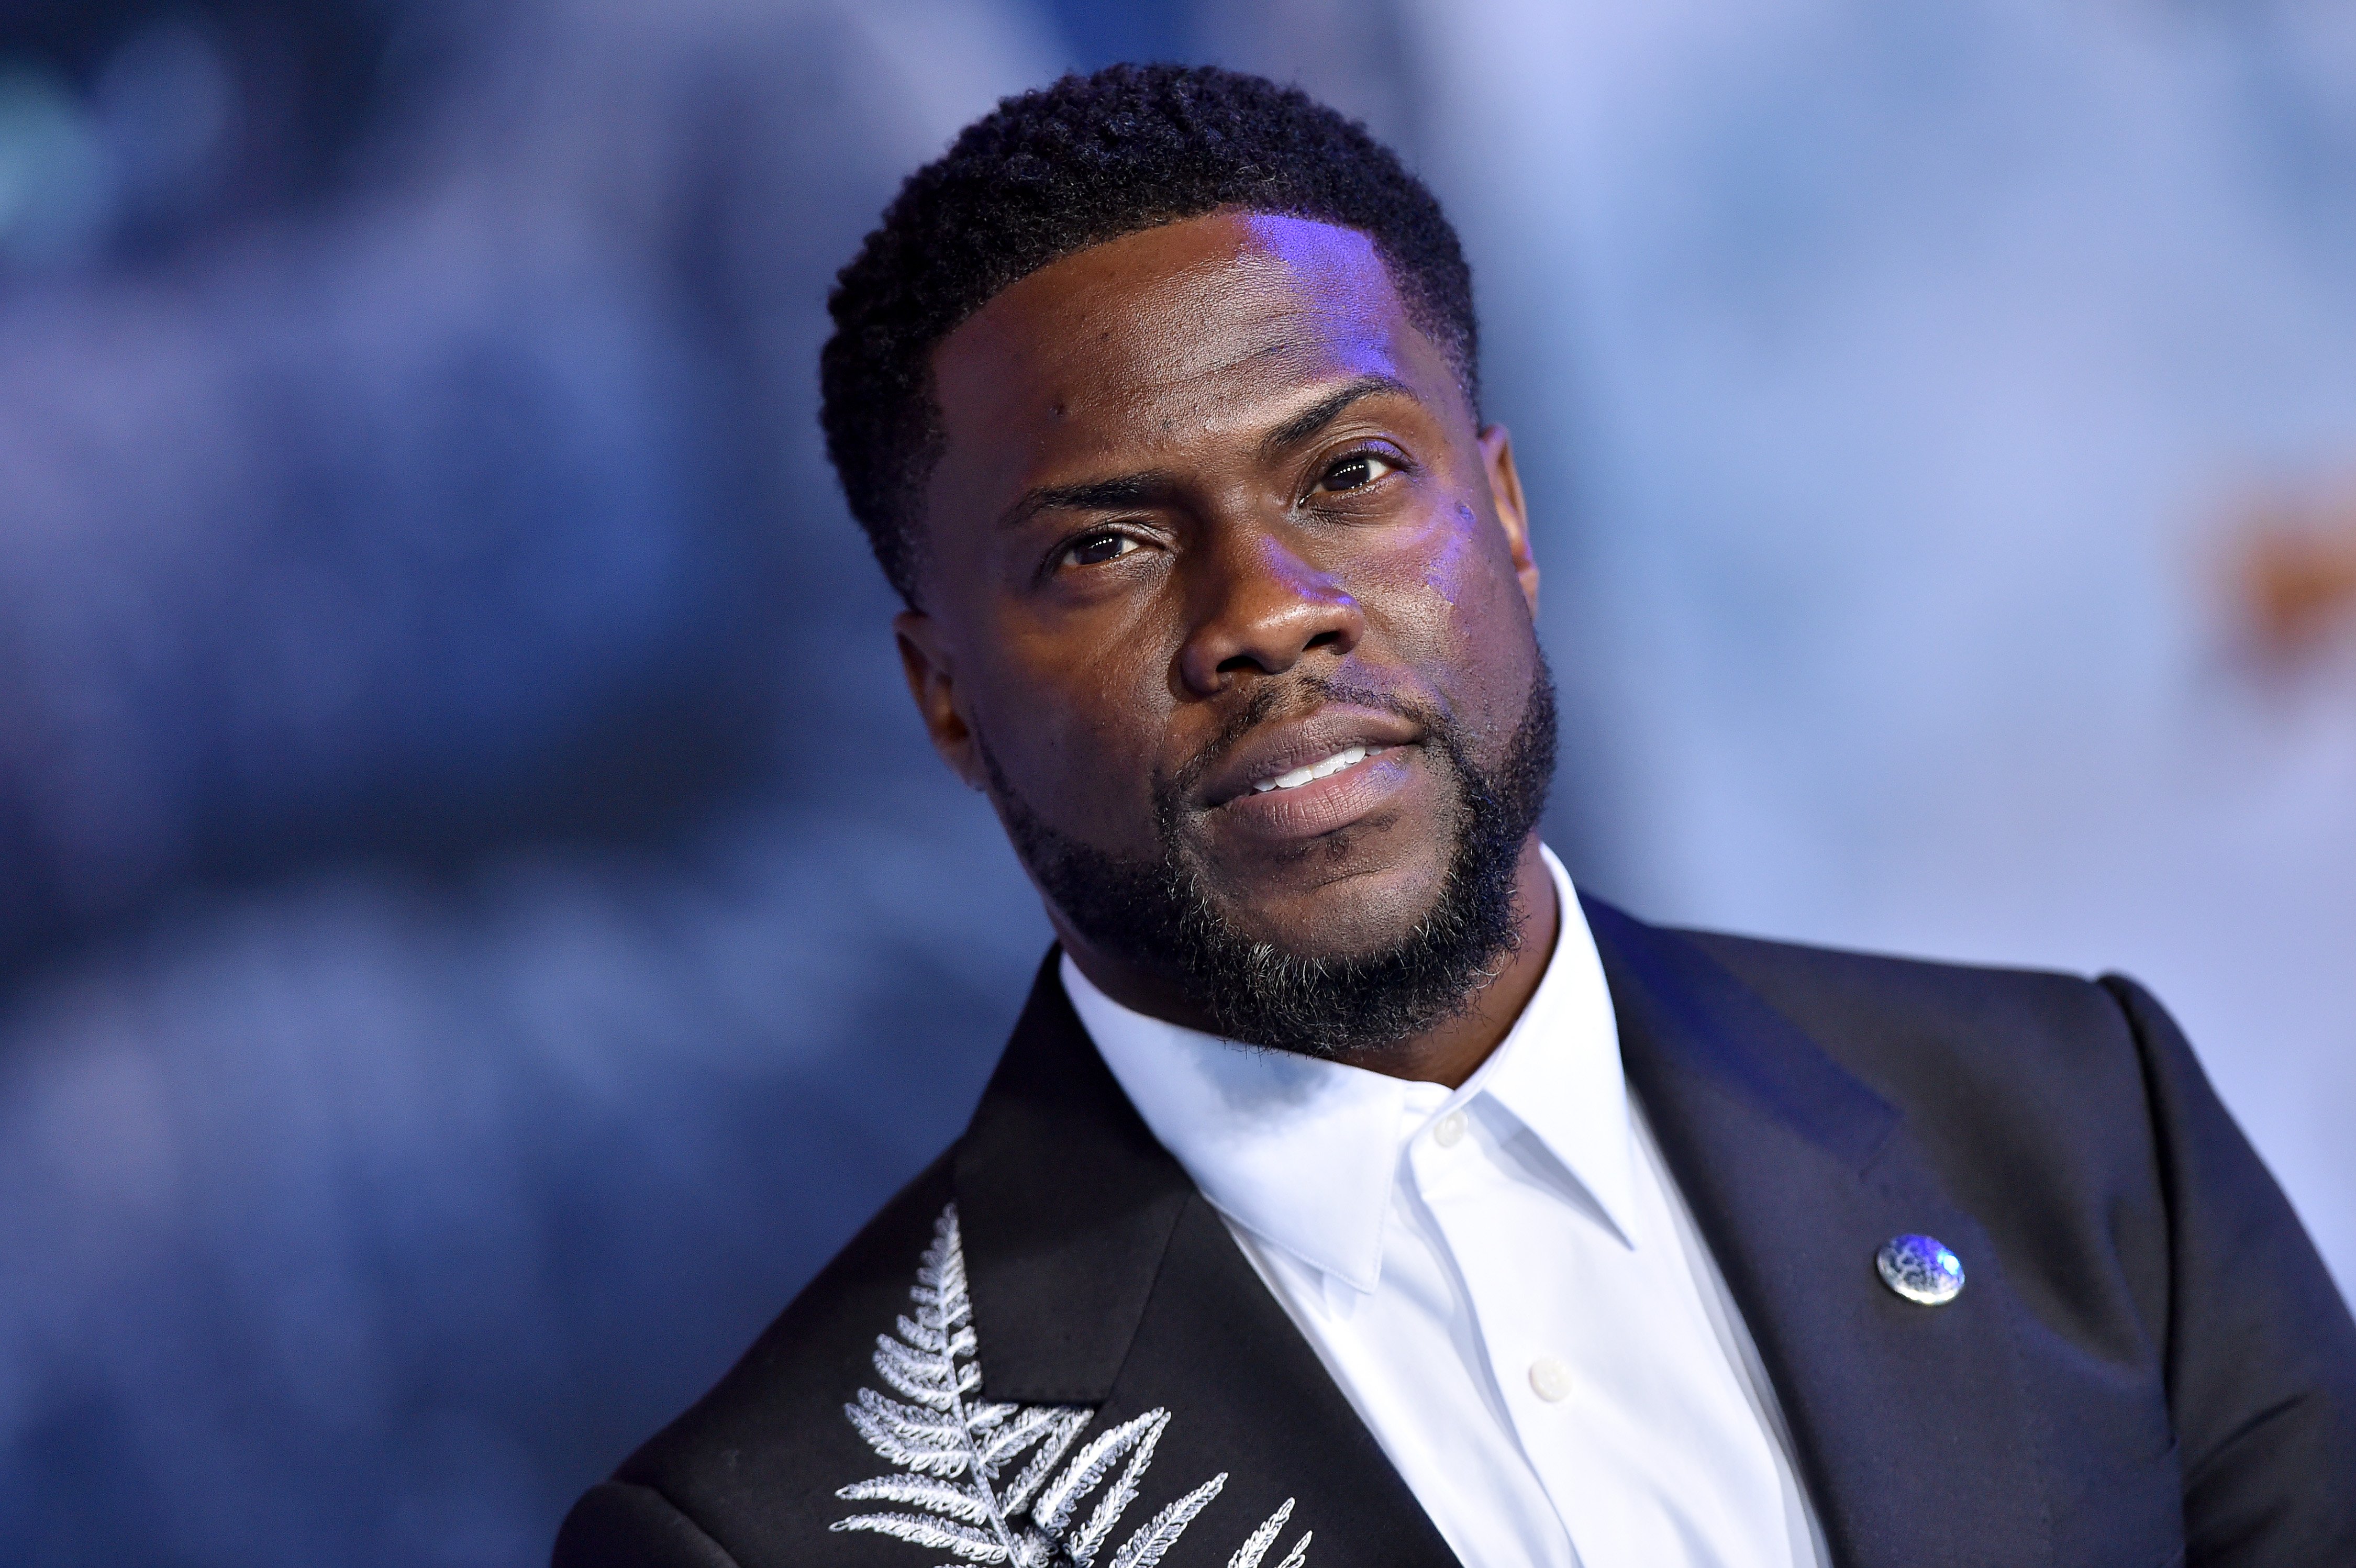 Kevin Hart at the "Jumanji: The Next Level" premiere on December 09, 2019, in Hollywood, California. | Source: Getty Images